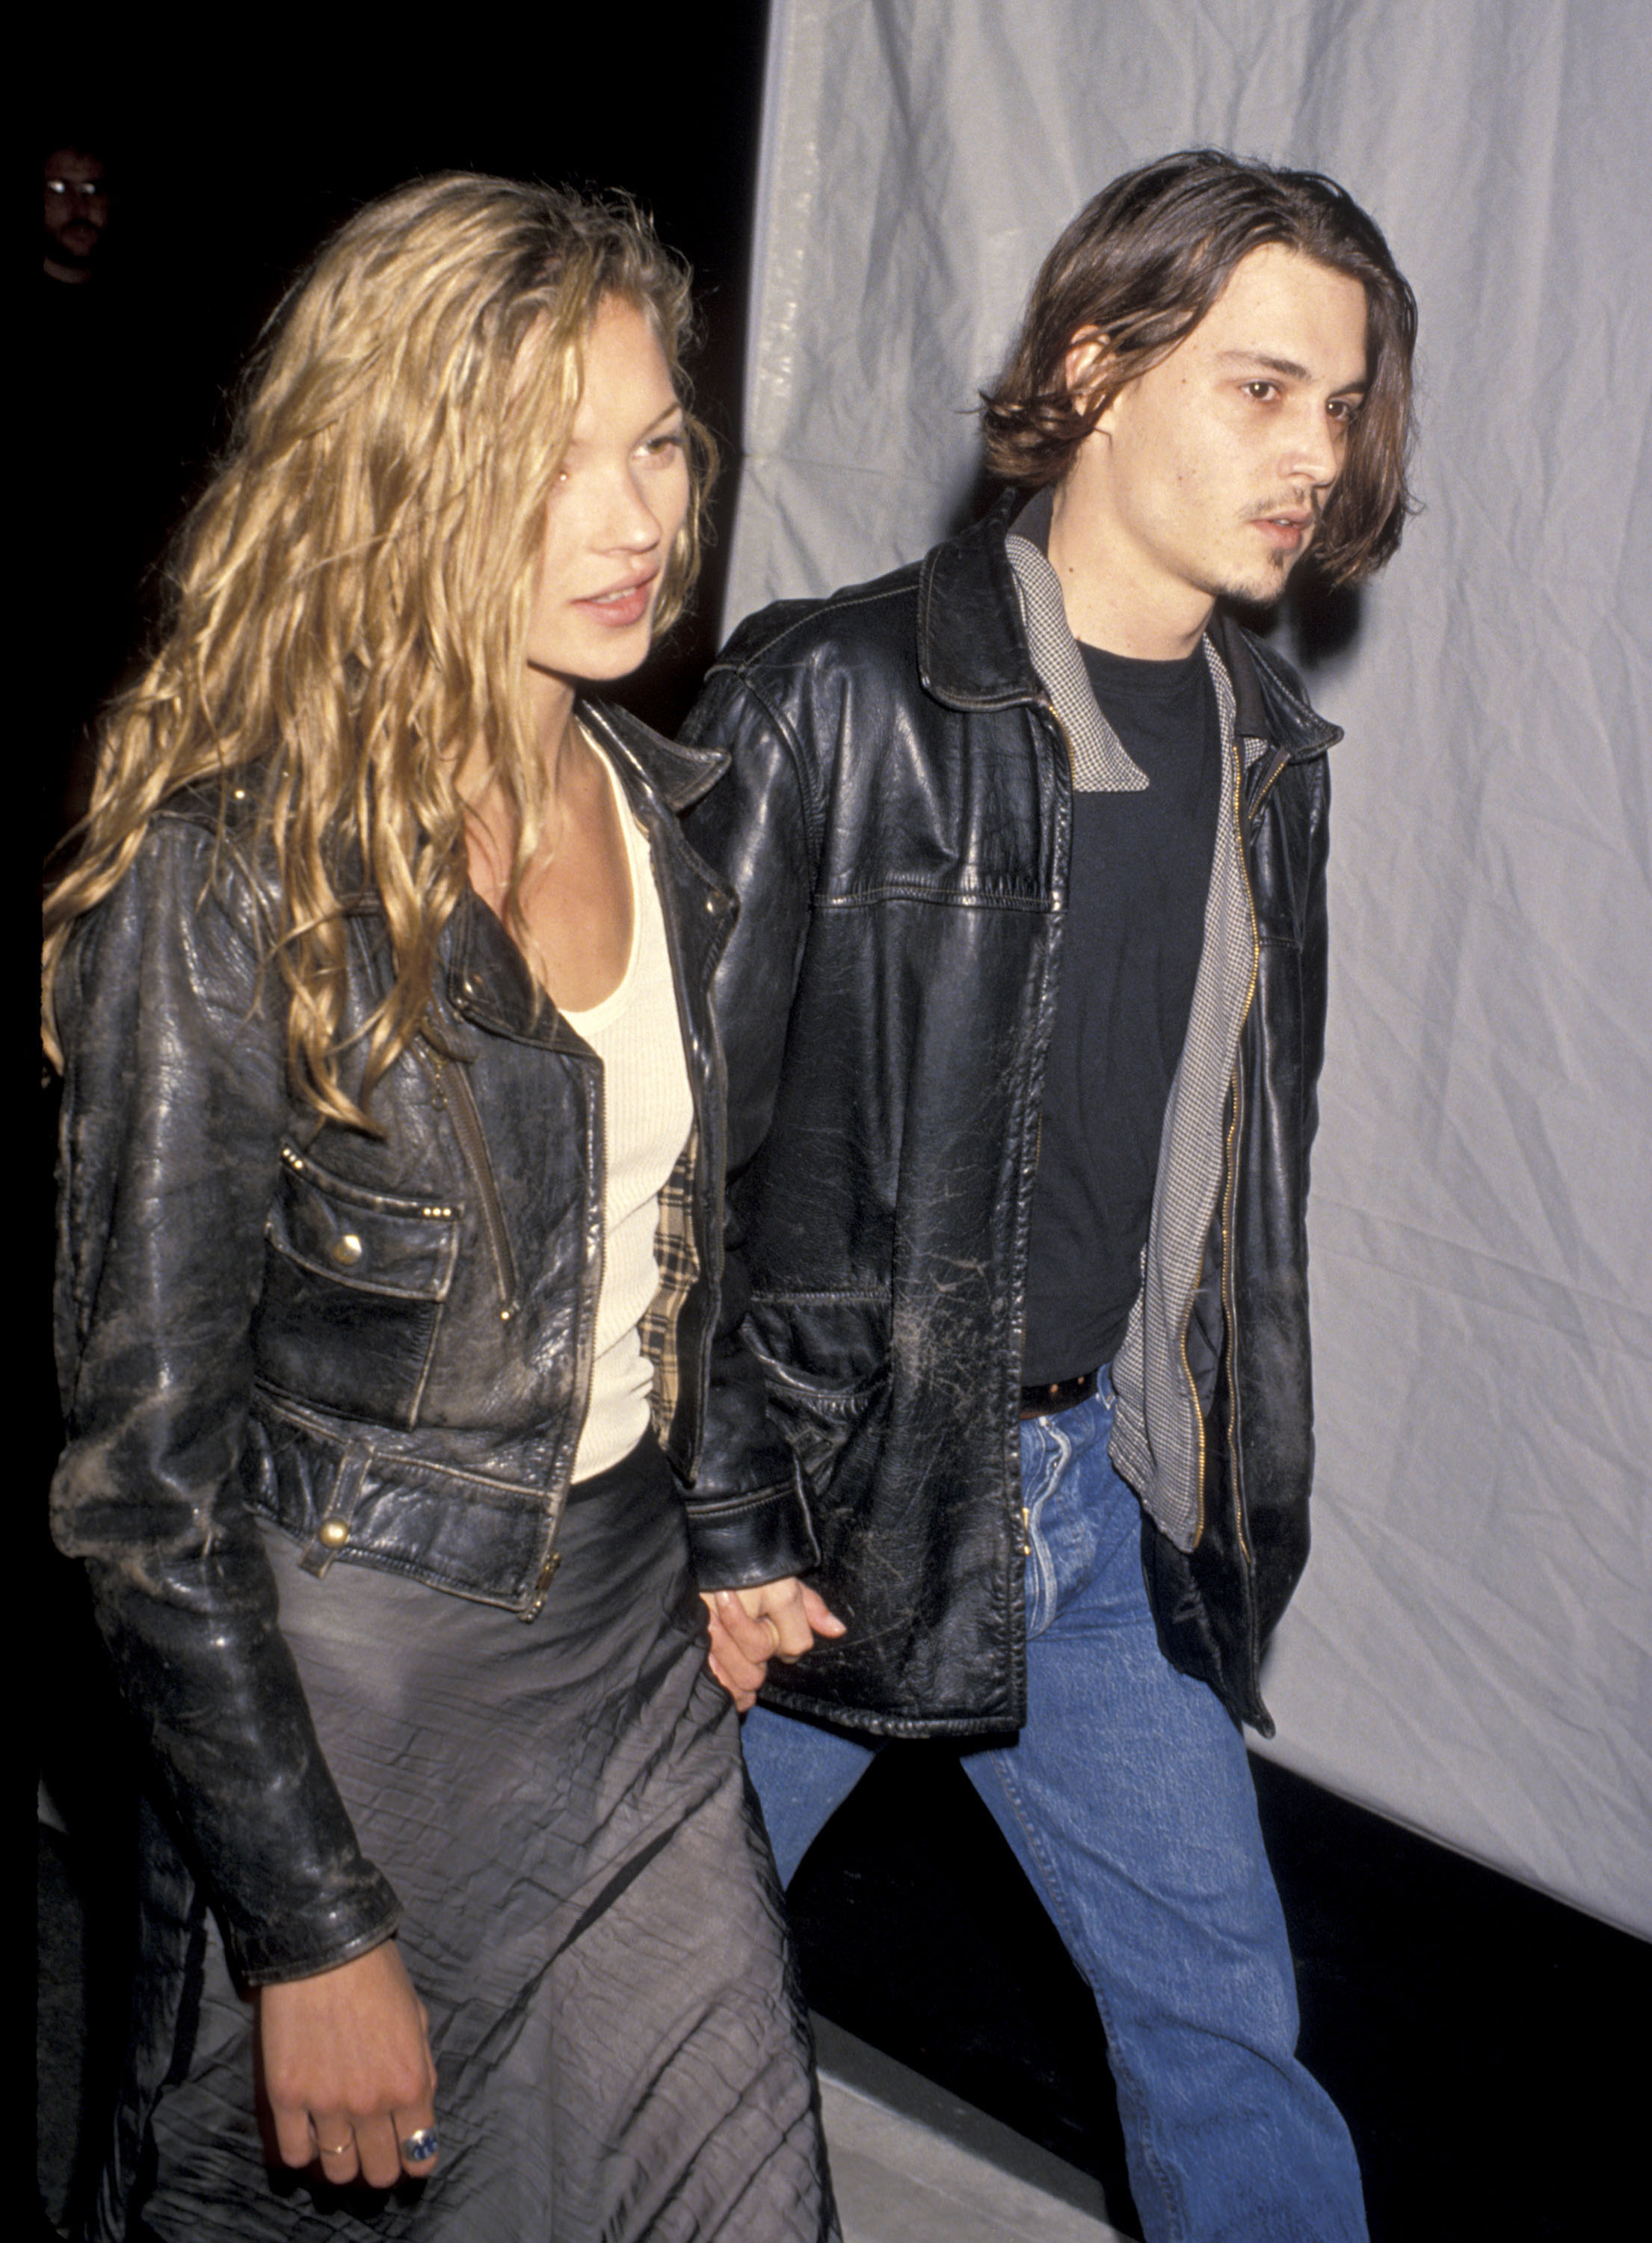 kate moss and johnny depp holding hands and wearing leather jackets in 1994